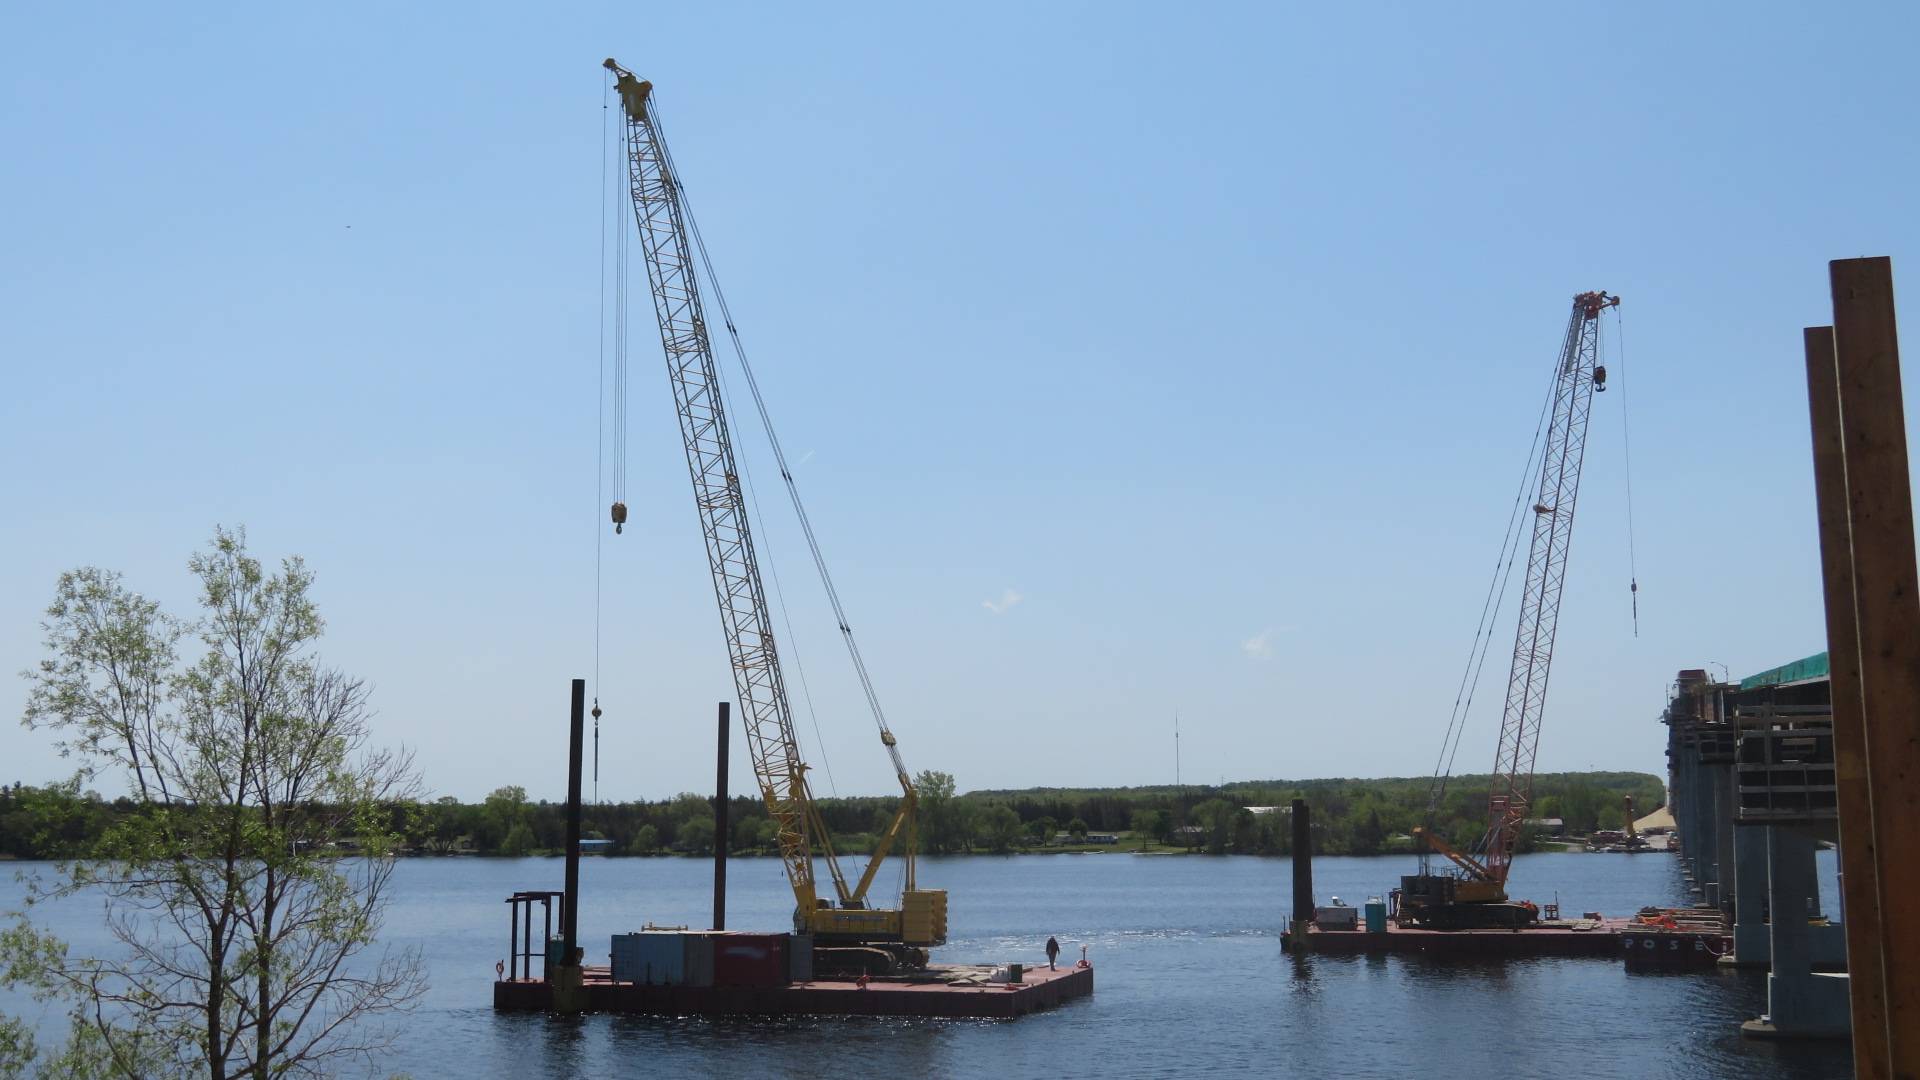 Moving the crane and barge into place